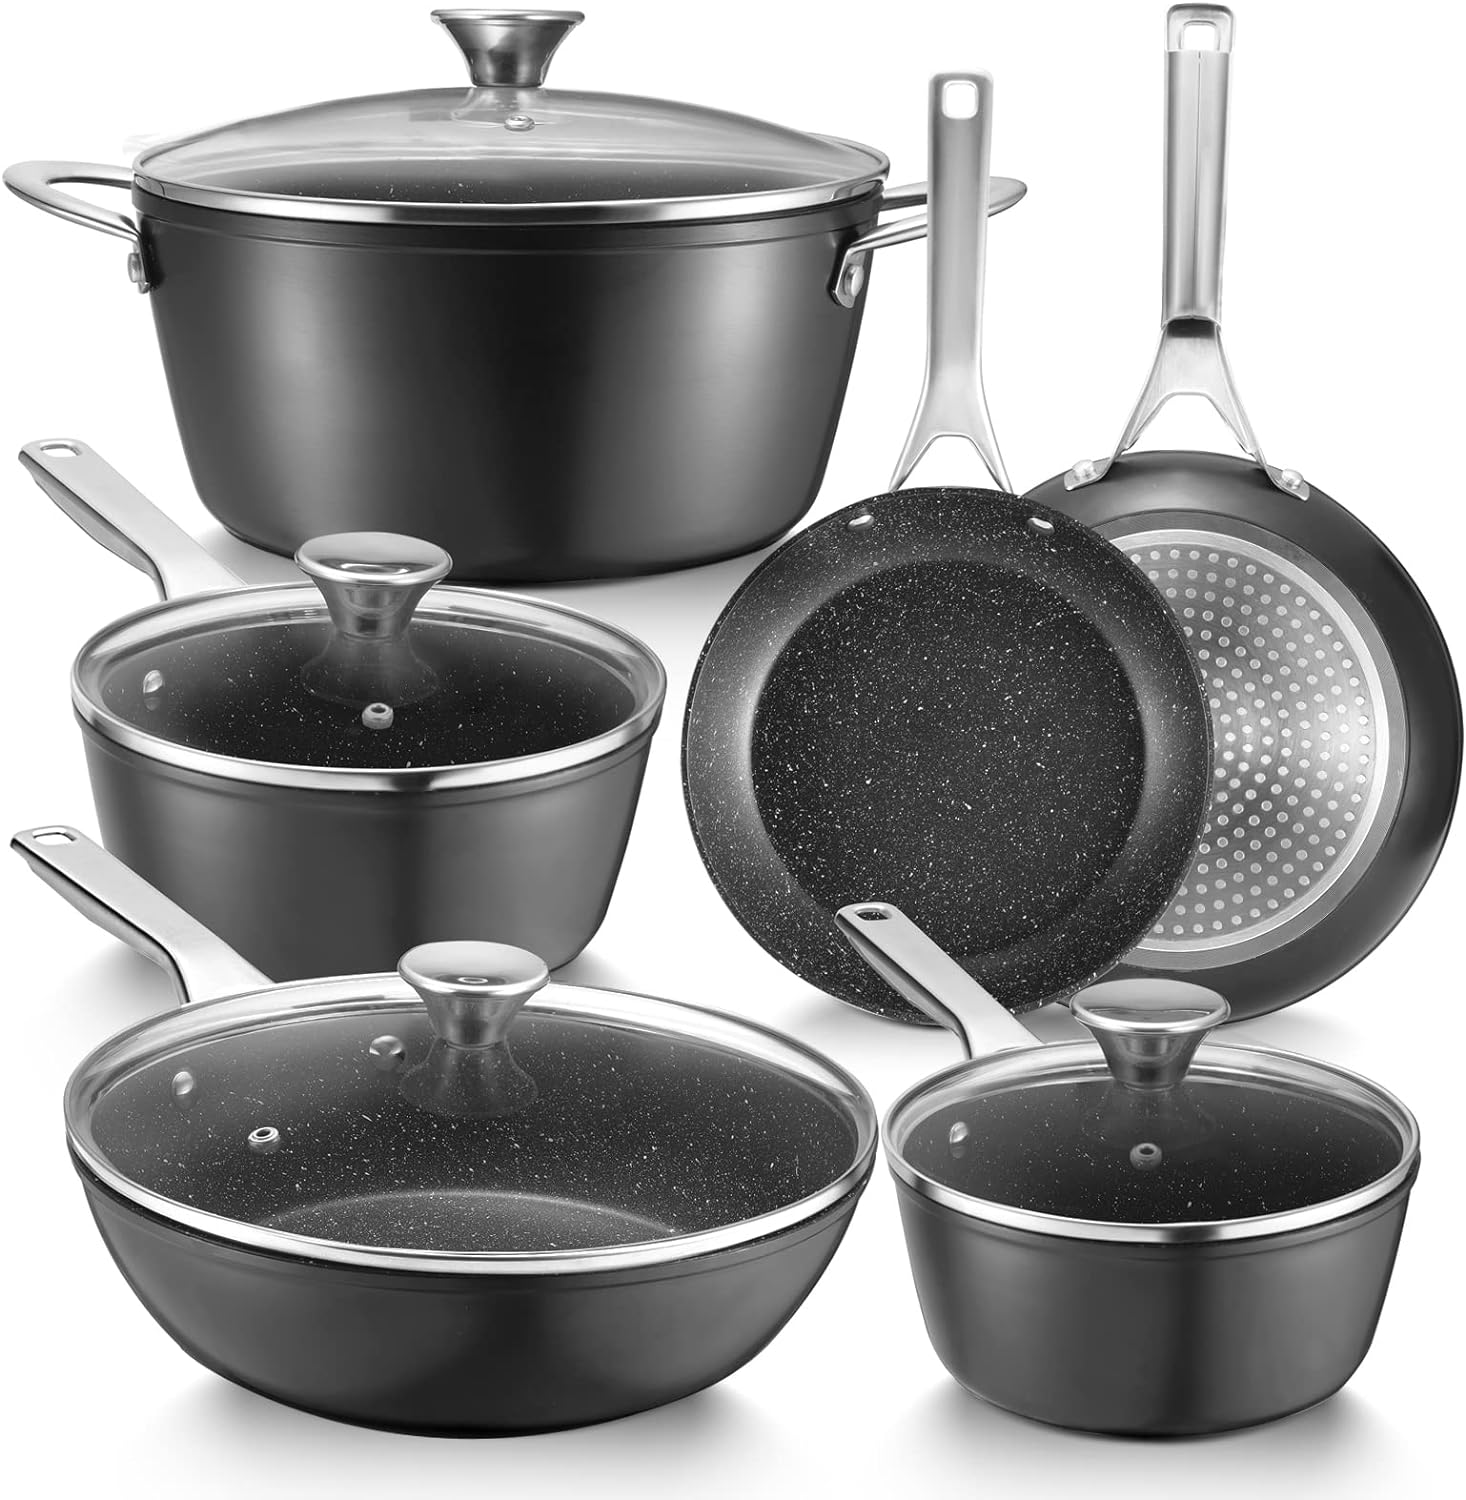 Induction Cookware Set, Fadware Pots and Pans Set Nonstick, Dishwasher Safe Pan Sets for Cooking, Utensils Set w/Frying Pans, Saucepans & Stockpot, Kitchen Essentials for New Home, Black